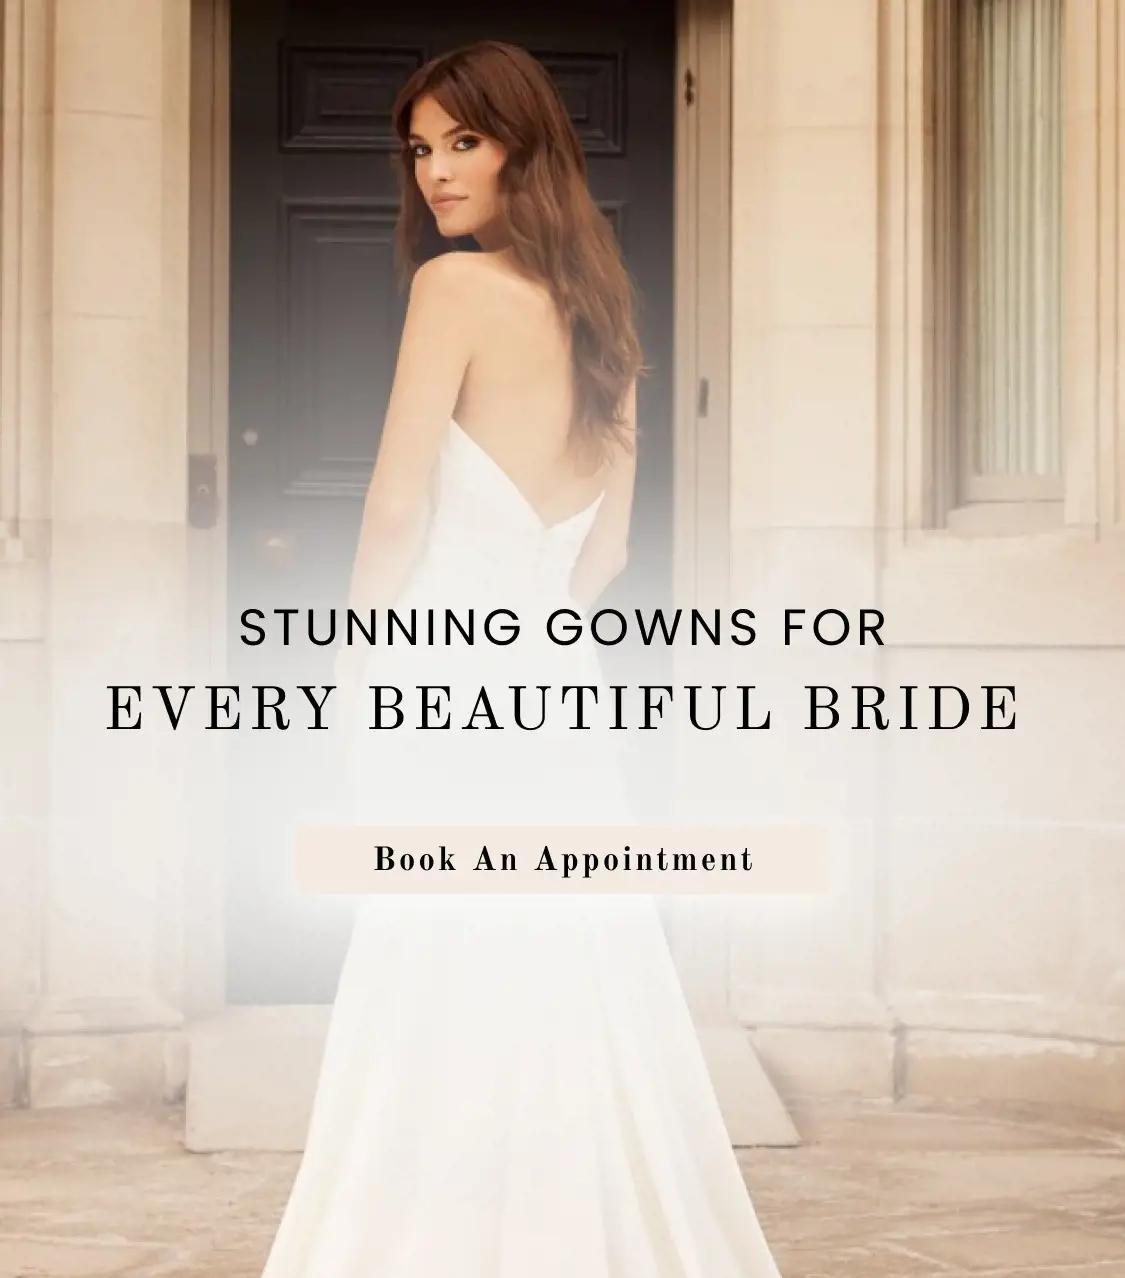 Stunning gowns for every beautiful bride mobile